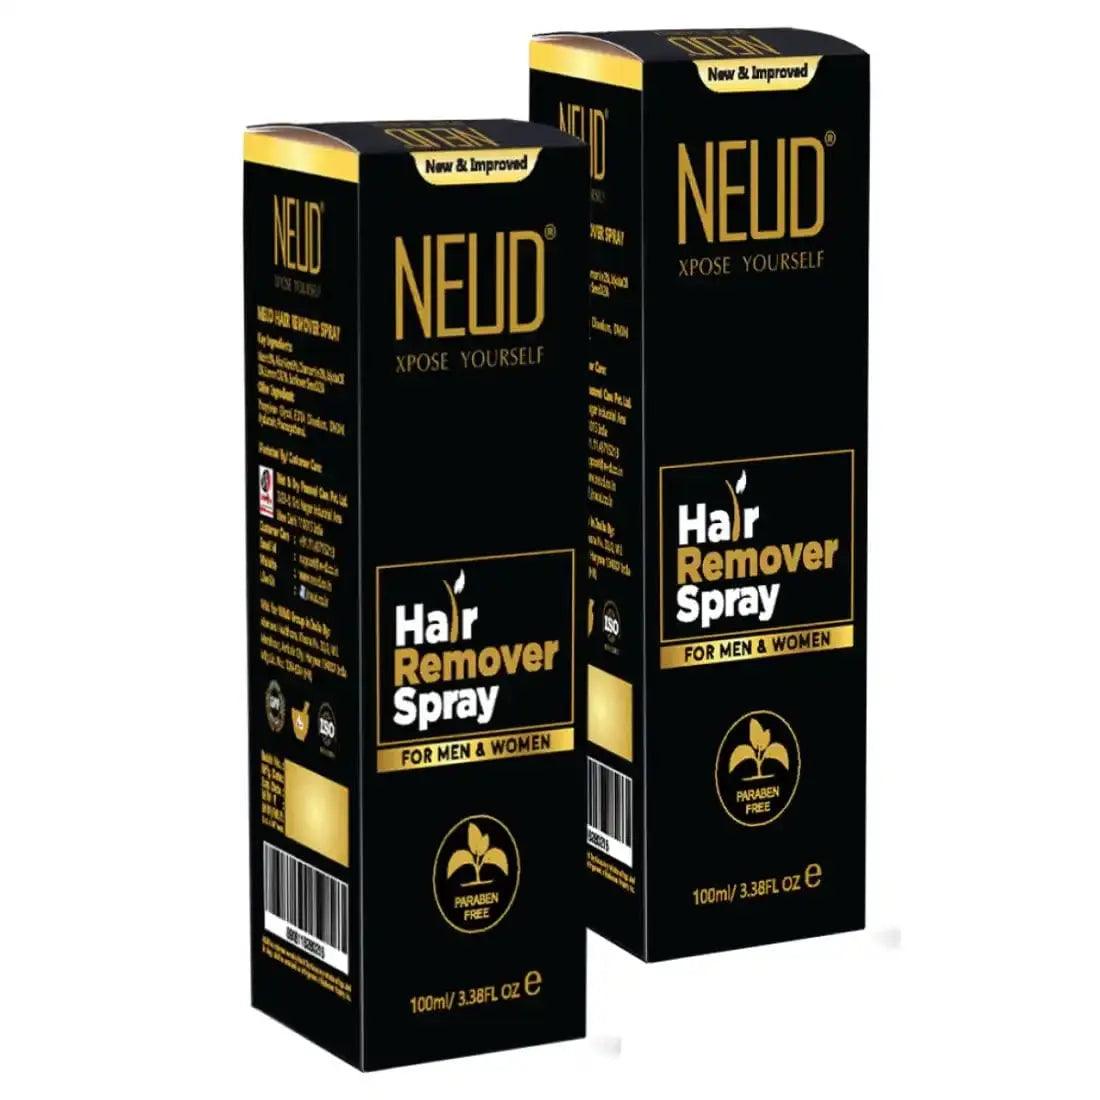 NEUD Hair Remover Spray with Retarding Effect of Natural Bio-Actives for Men & Women - 100 ml 8903540011562